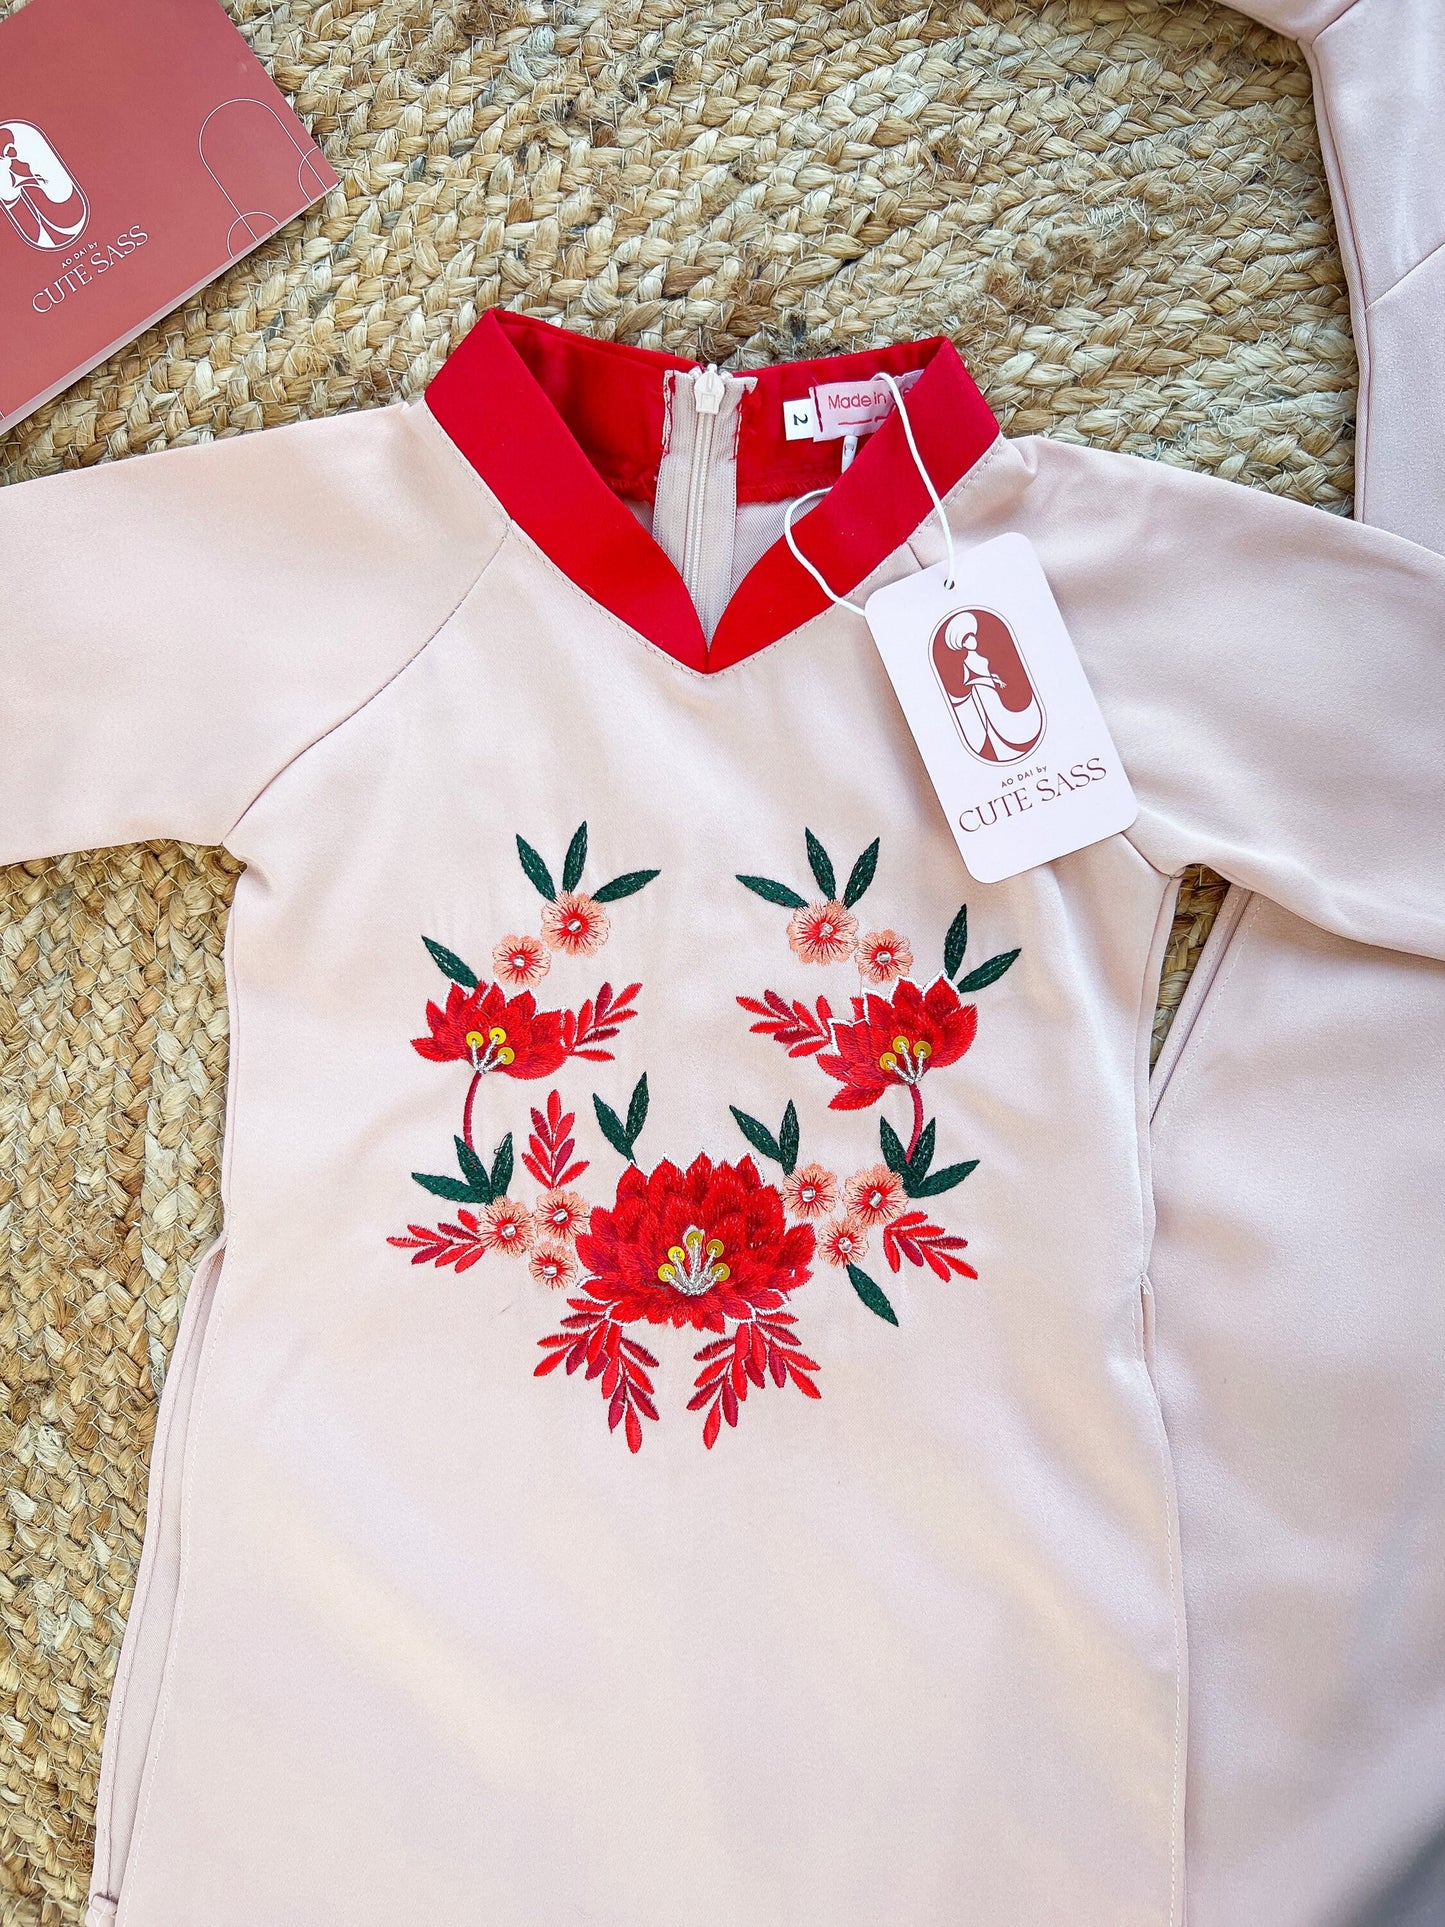 Mom and Daughter Pink / Red Embroidery Matching Ao Dai Set